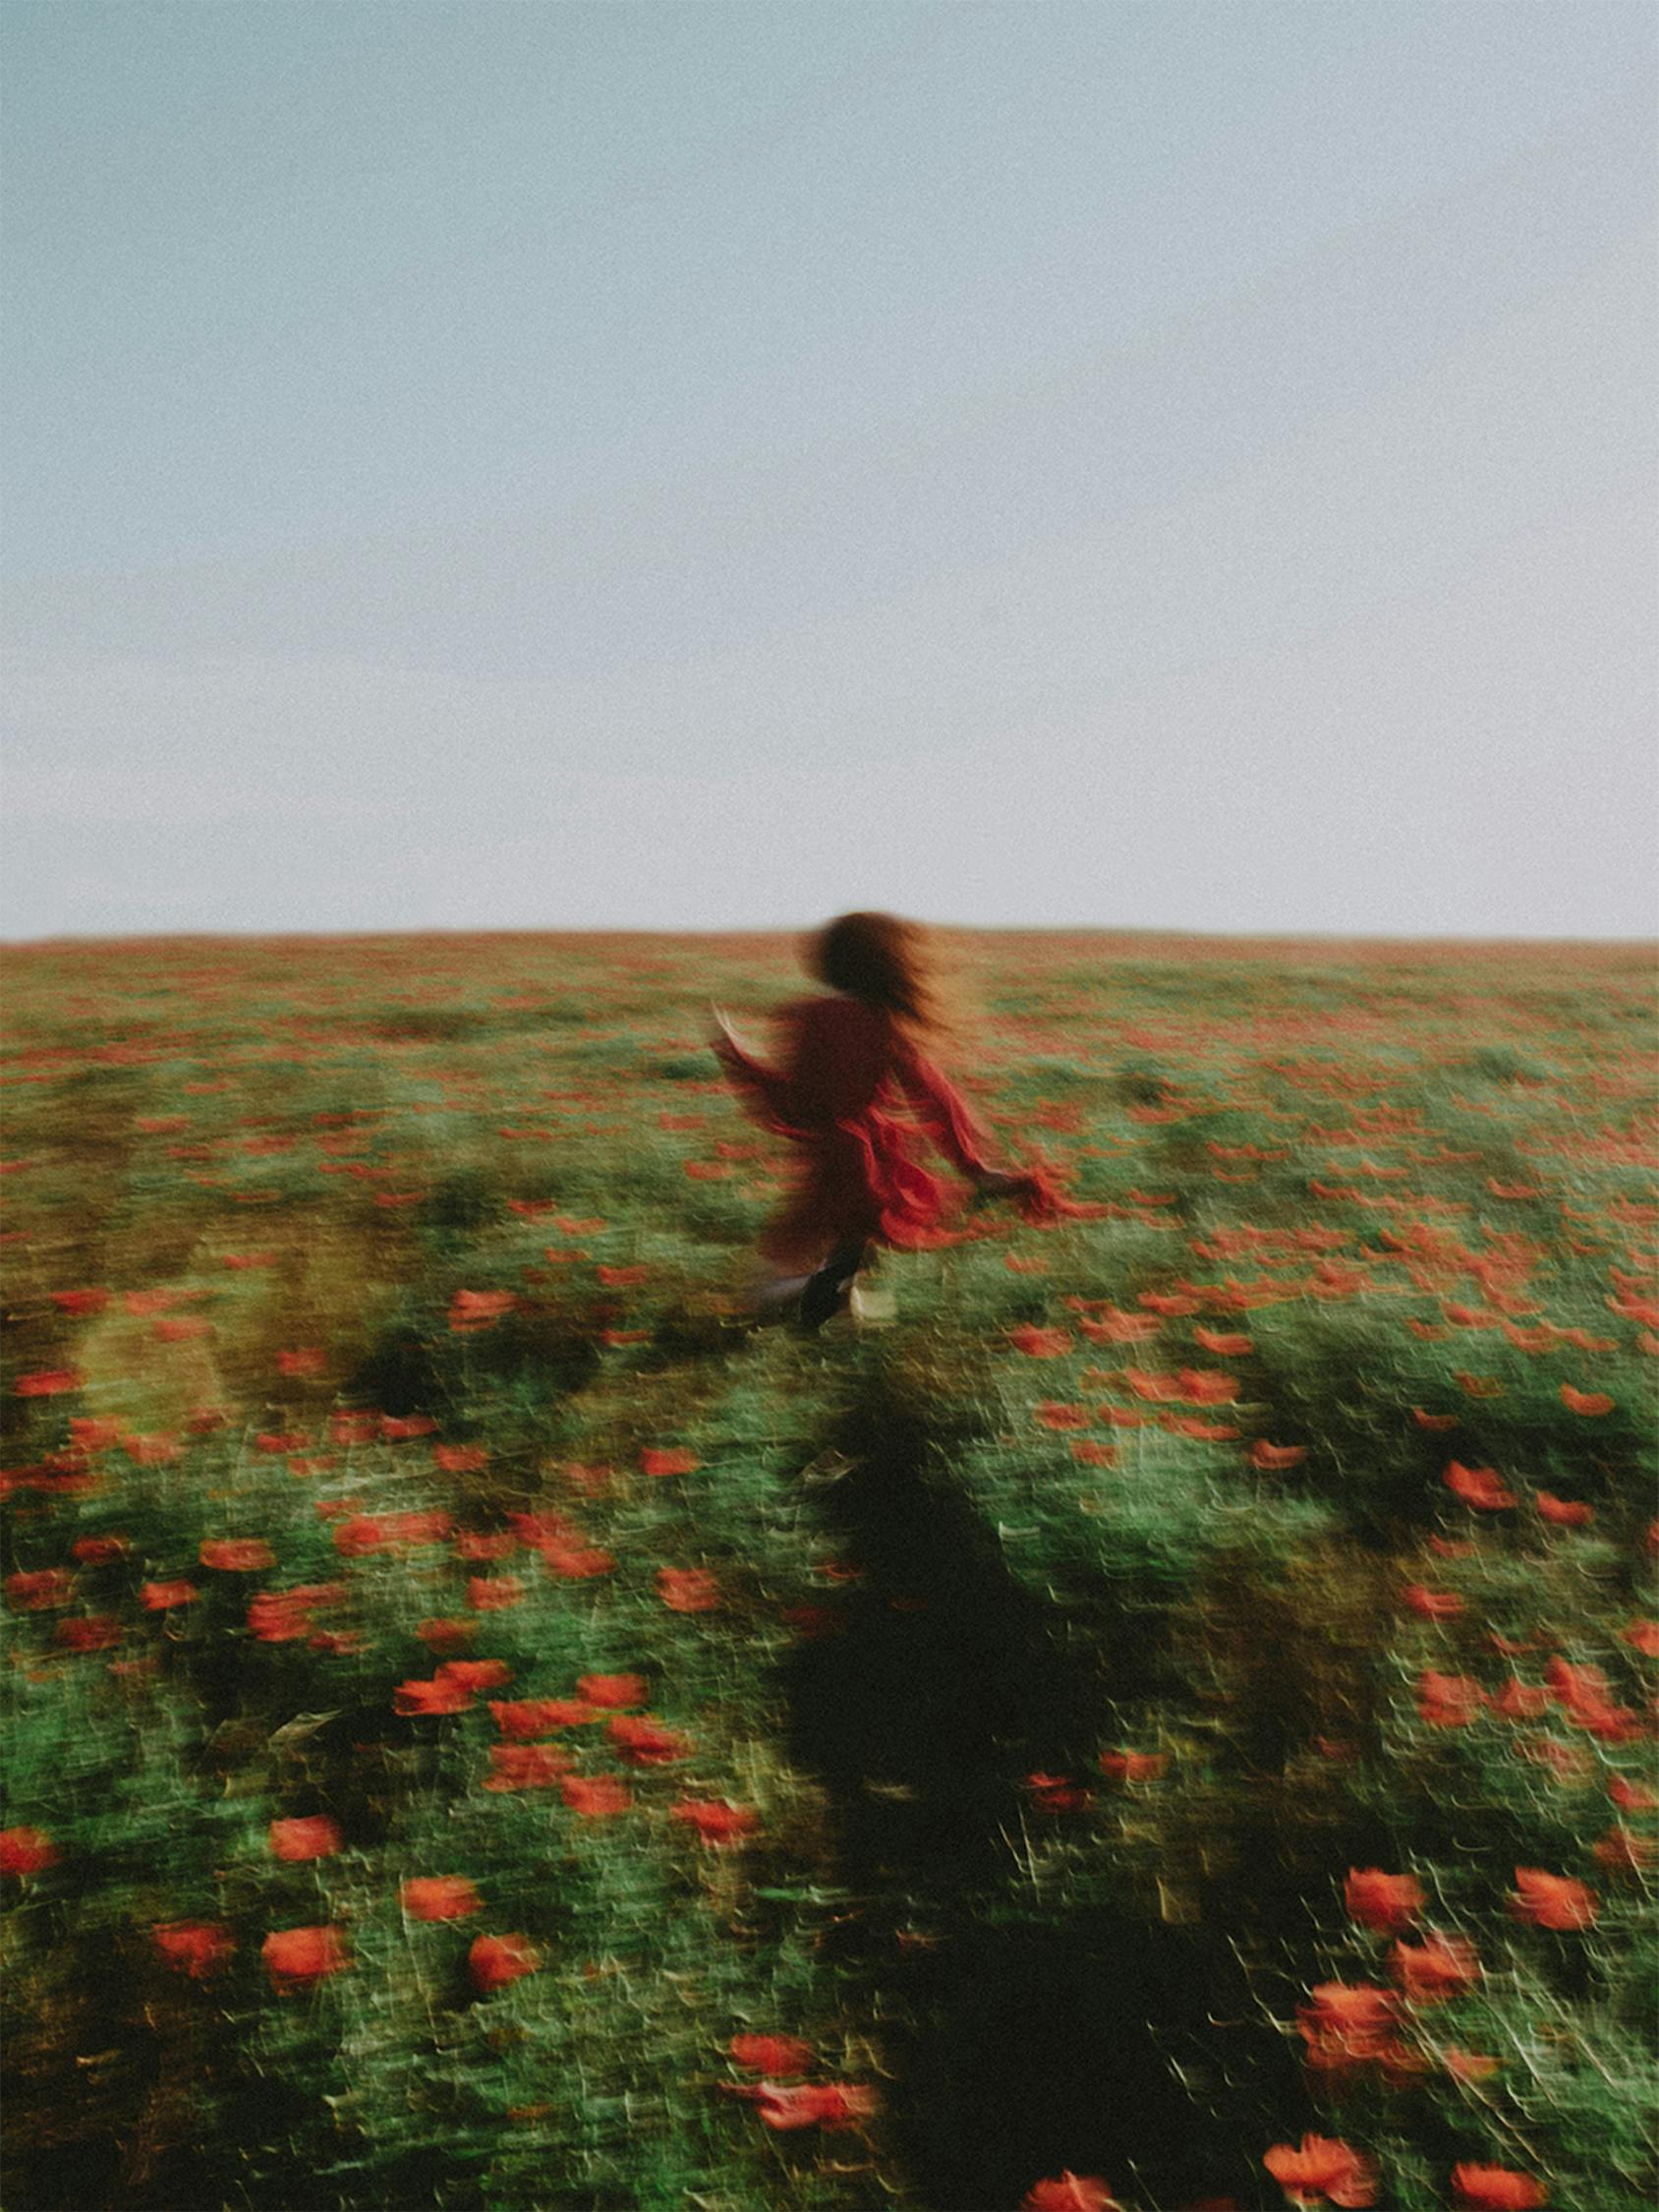 Blurred Photo of Woman in Red Running Through Poppy Field